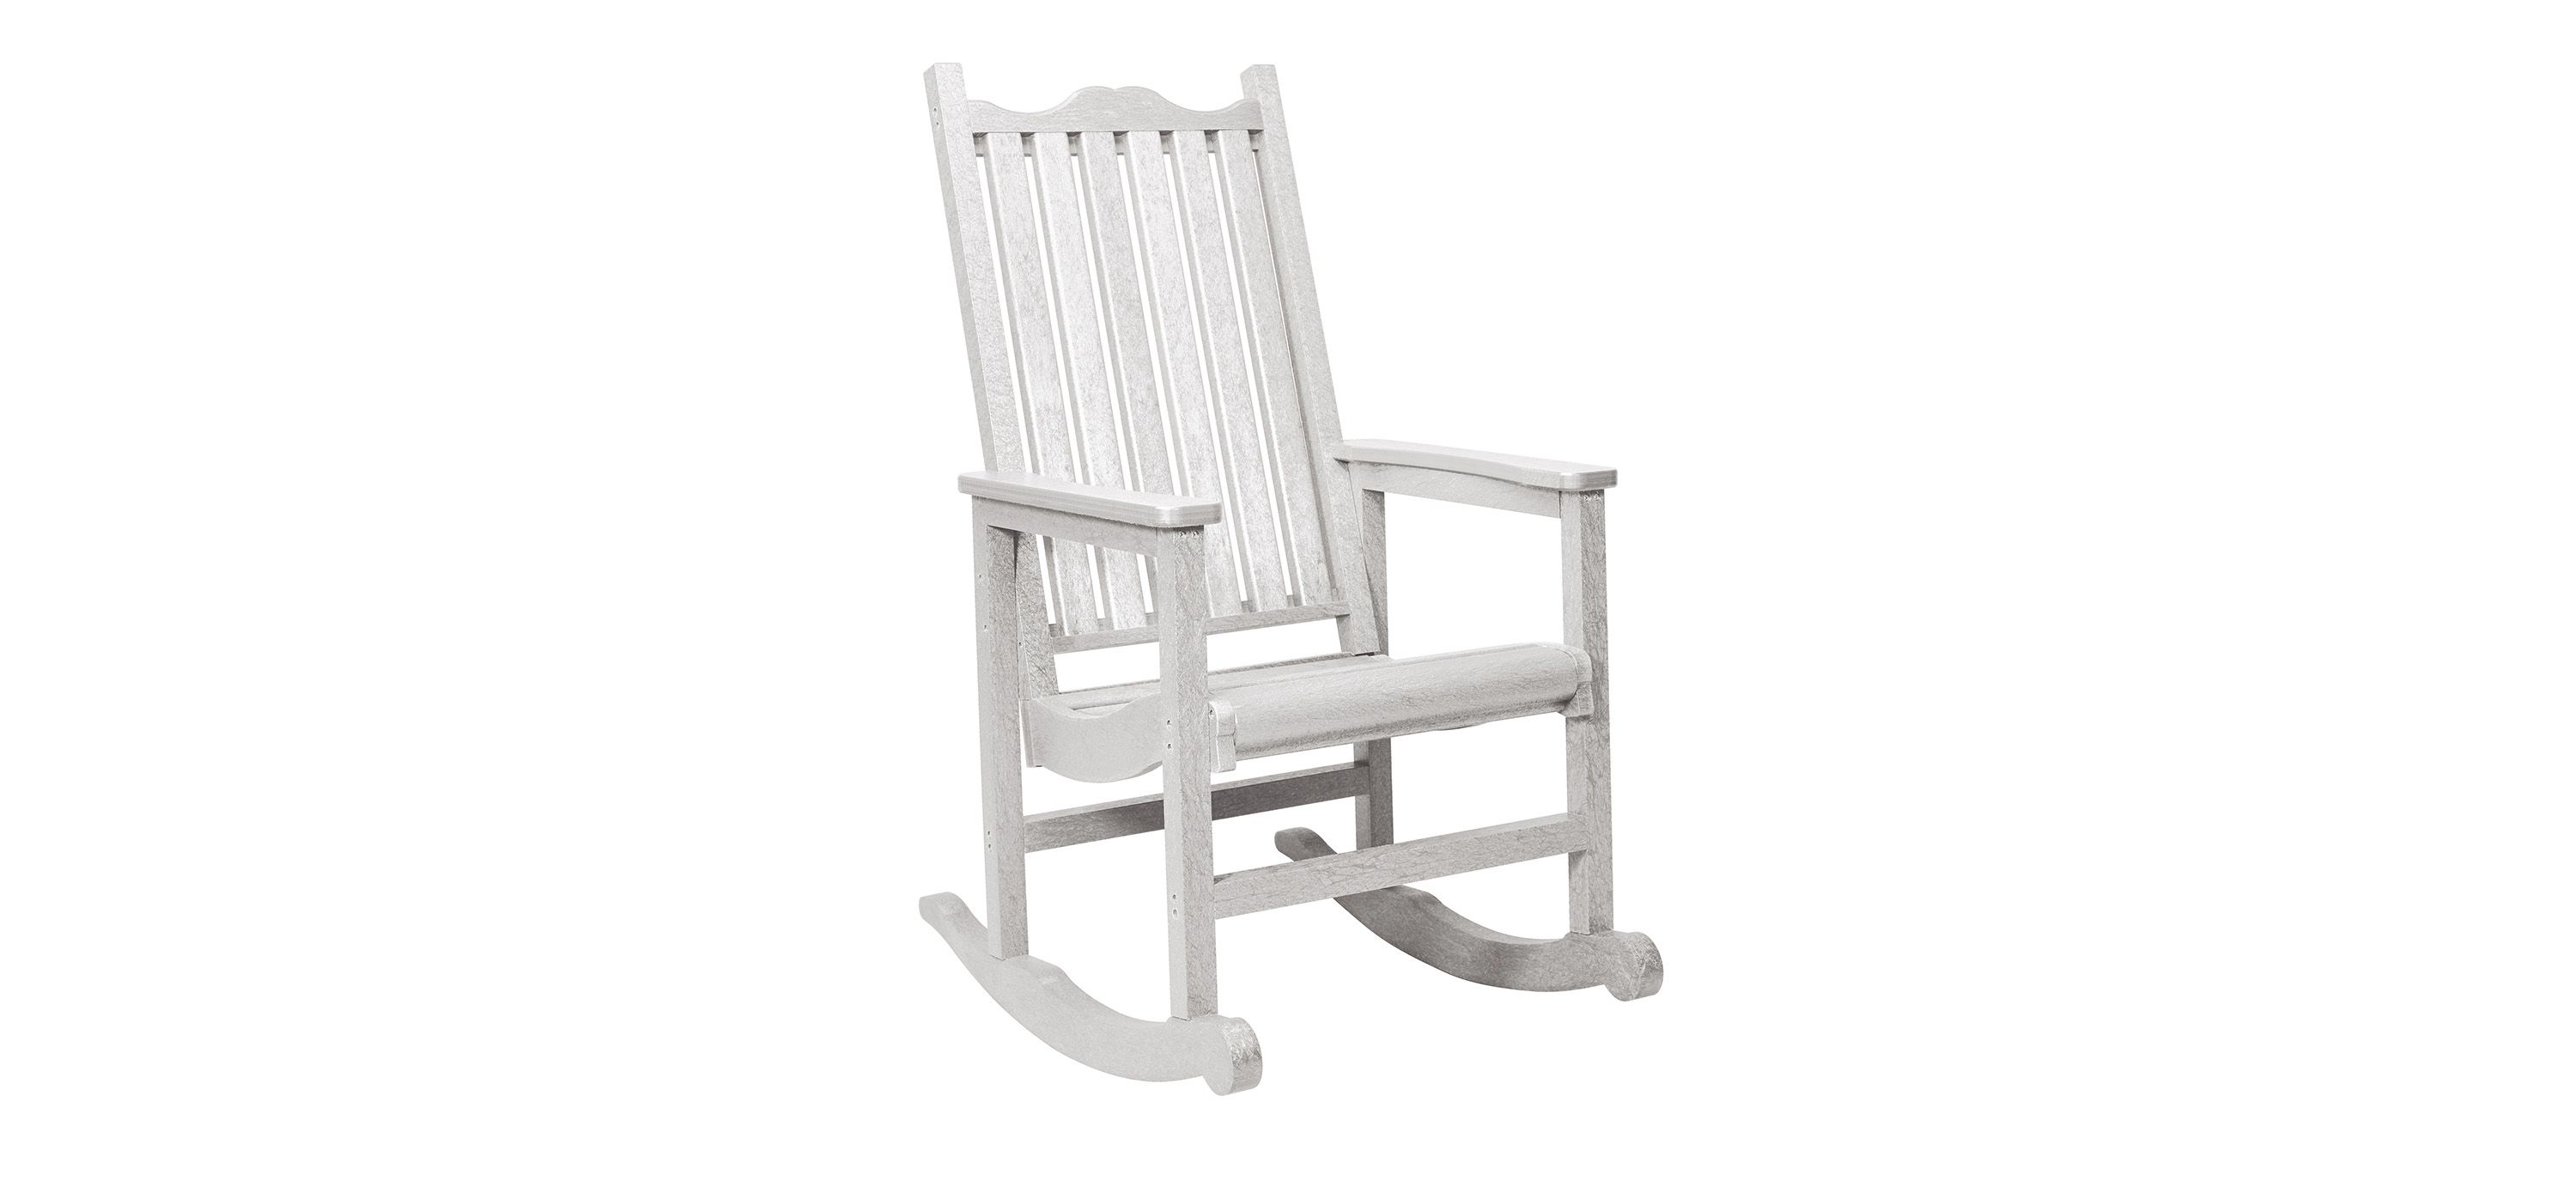 Generation Recycled Outdoor Rocking Chair